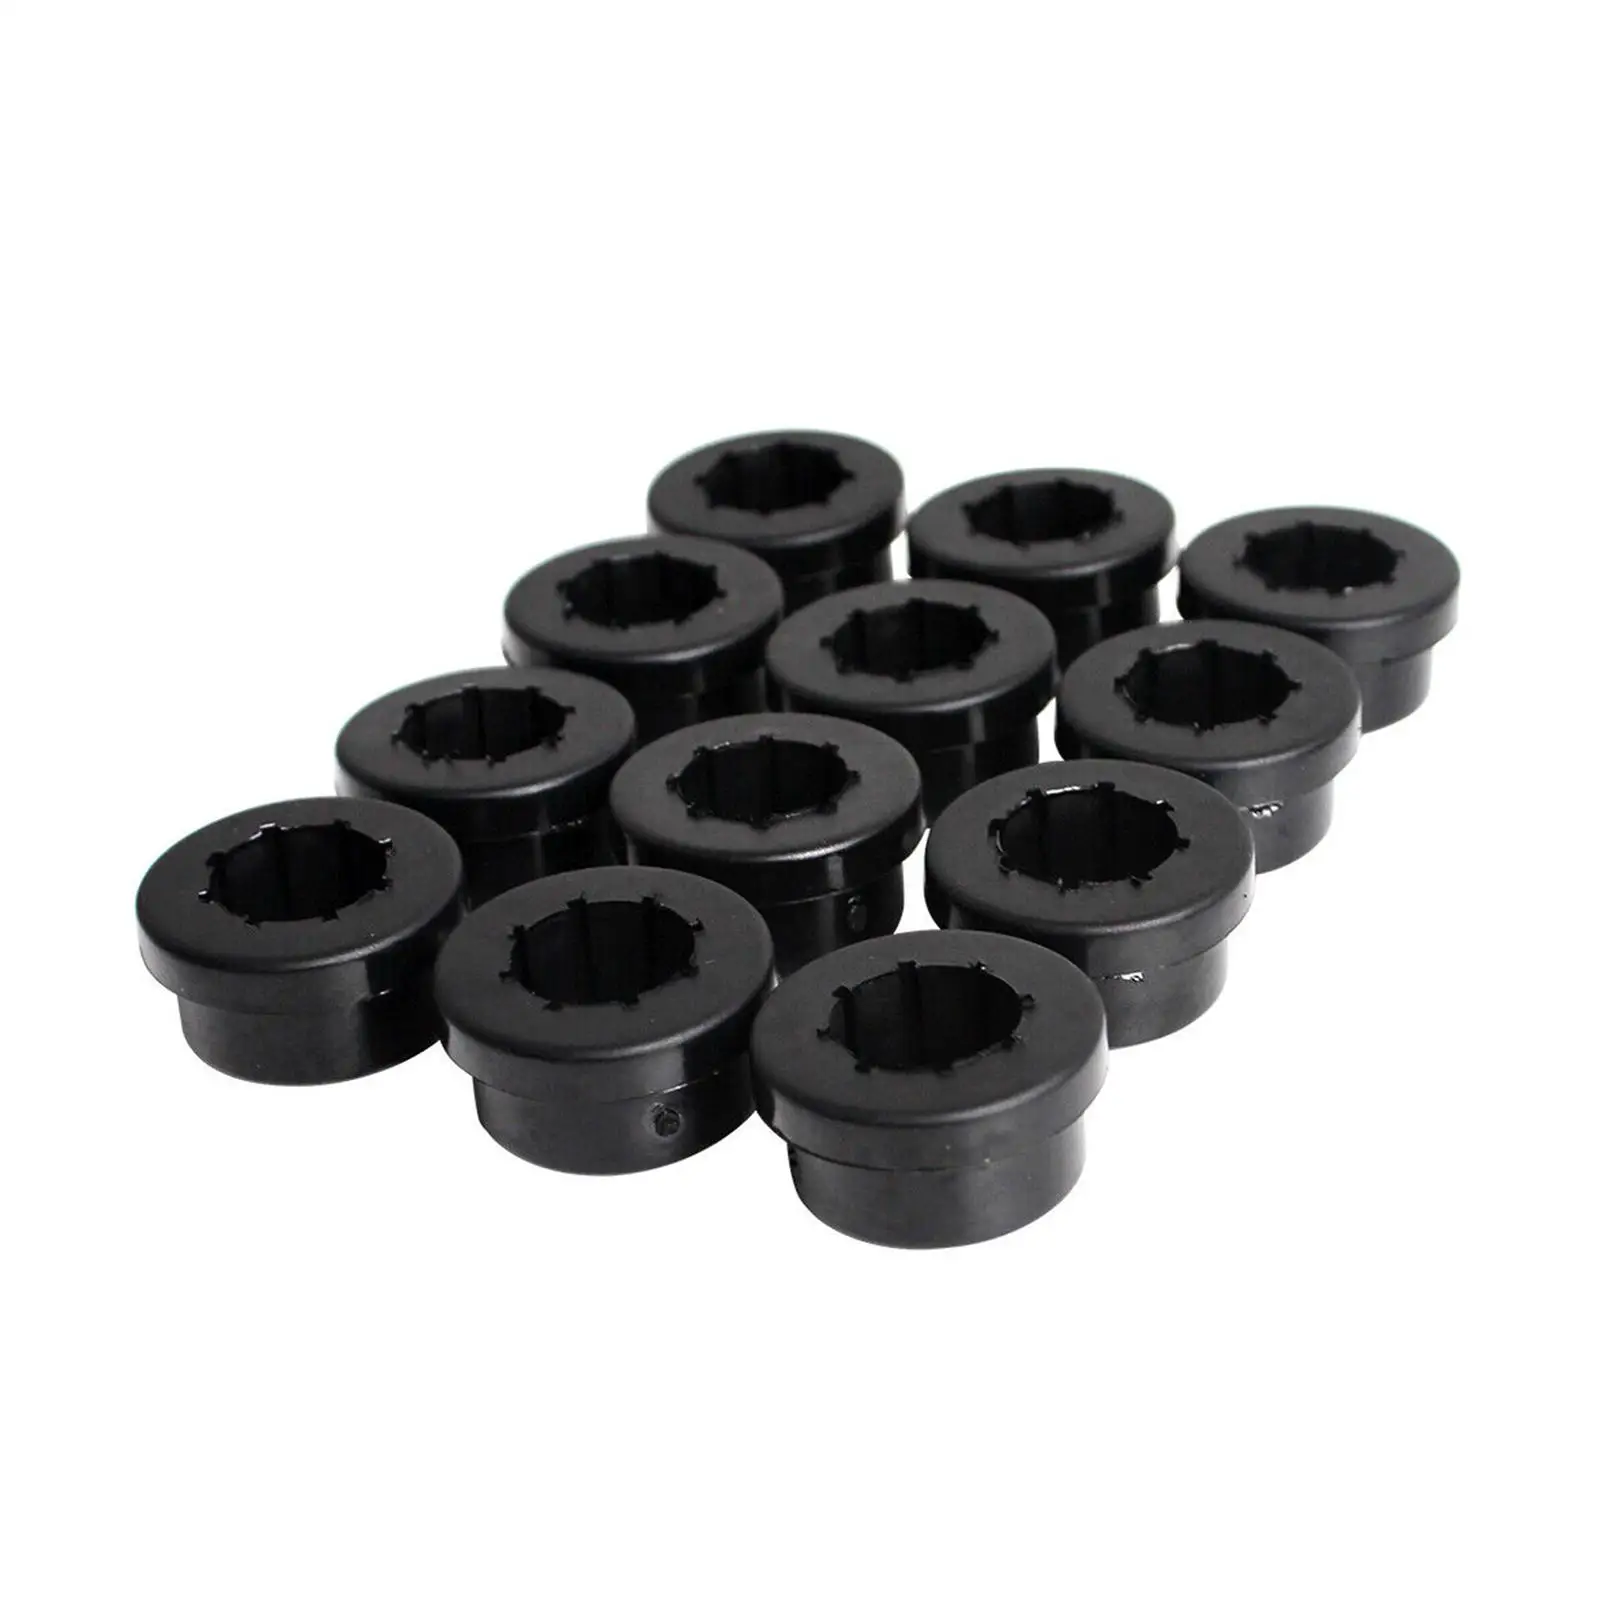 12 Pieces Lower Control Arm Rear Camber Bushings Replacement Parts Black Easy Installation for Skunk2 Eg EK DC Accessories